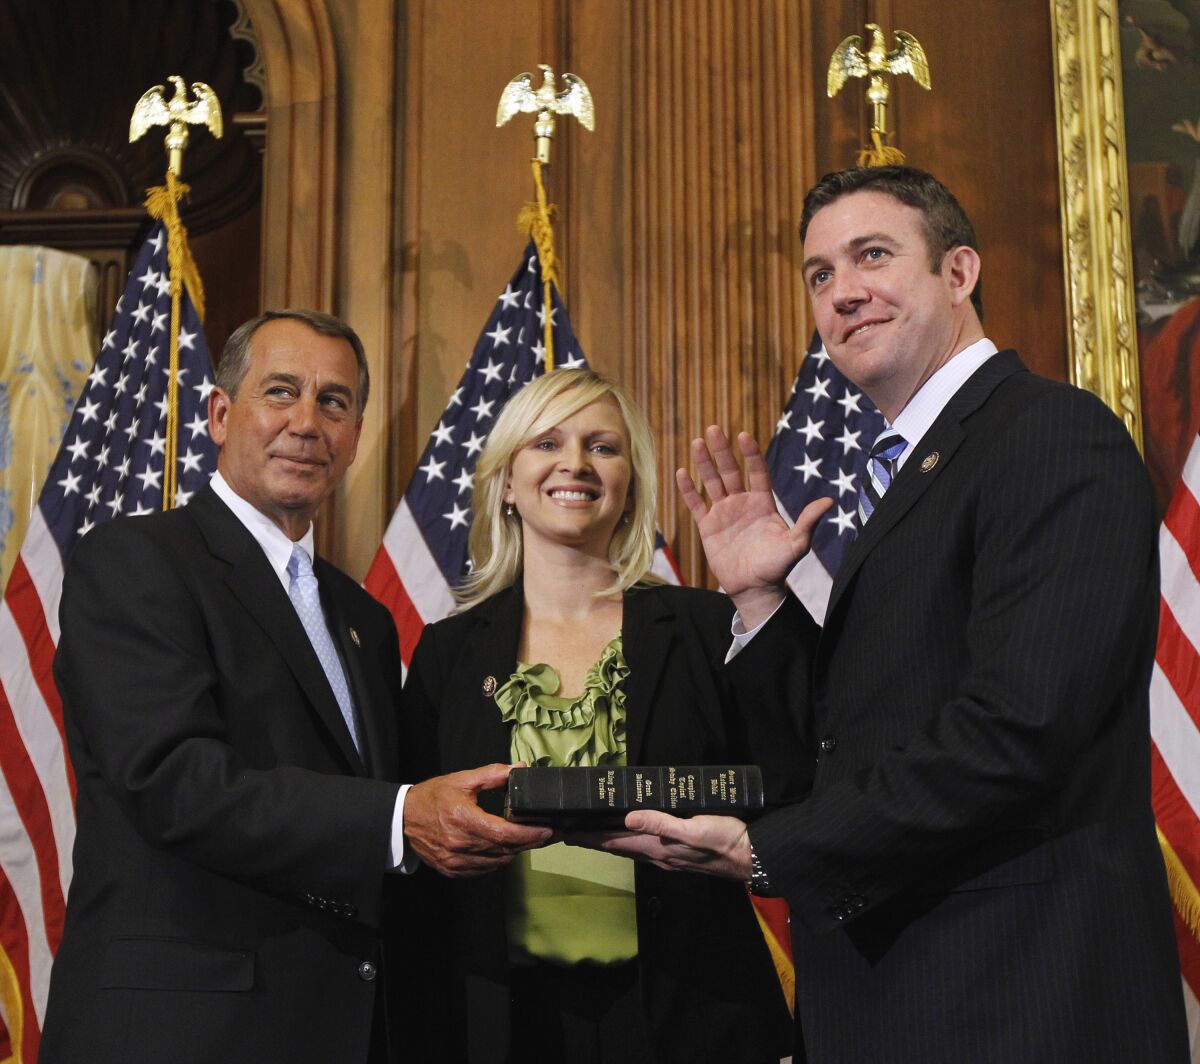 FILE - In this Jan. 5, 2011, file photo, then House Speaker John Boehner of Ohio, left, administers the House oath to Rep. Duncan Hunter, R-Calif., as his wife, Margaret Hunter, looks on during a mock swearing-in ceremony on Capitol Hill in Washington. Margaret Hunter has filed for divorce from former Rep. Duncan Hunter on Nov. 20, 2020, in San Diego Superior Court according to online records. Both were convicted of corruption and prosecutors had said that the lawmaker had used campaign funds on extramarital affairs. (AP Photo/Alex Brandon, File)